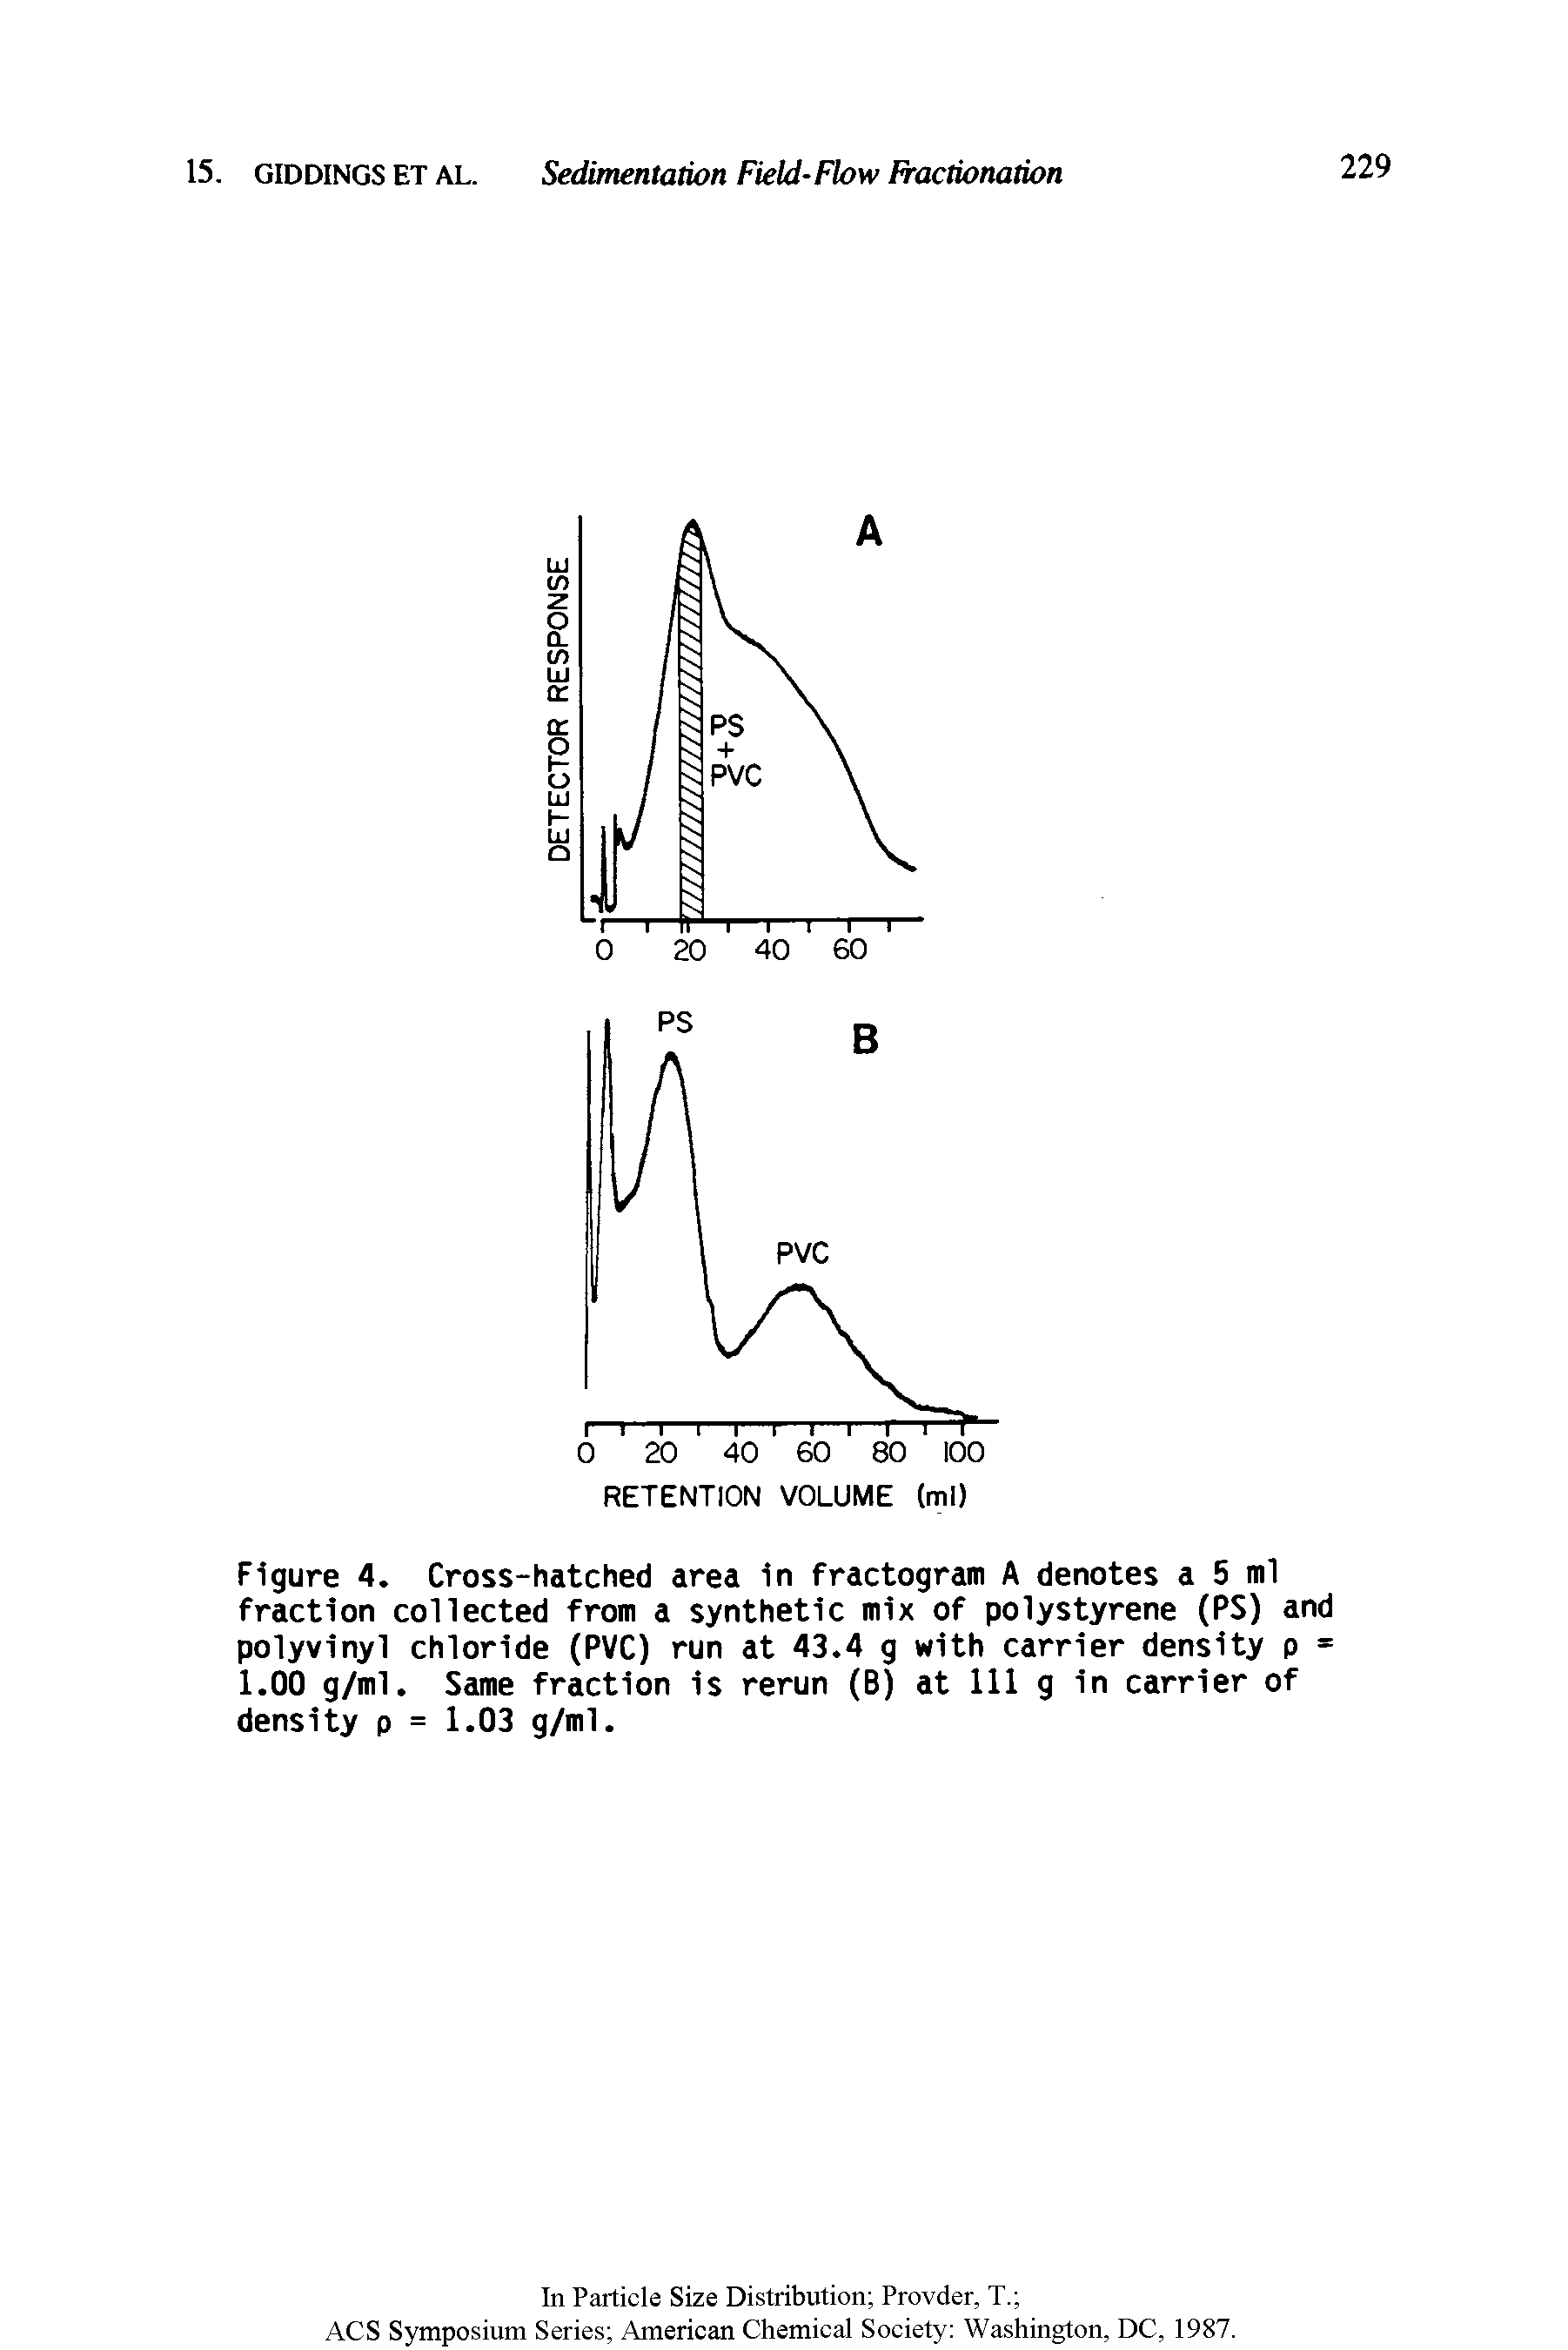 Figure 4. Cross-hatched area in fractogram A denotes a 5 ml fraction collected from a synthetic mix of polystyrene (PS) and polyvinyl chloride (PVC) run at 43.4 g with carrier density p = 1.00 g/ml. Same fraction is rerun (B) at 111 g in carrier of density p = 1.03 g/ml.